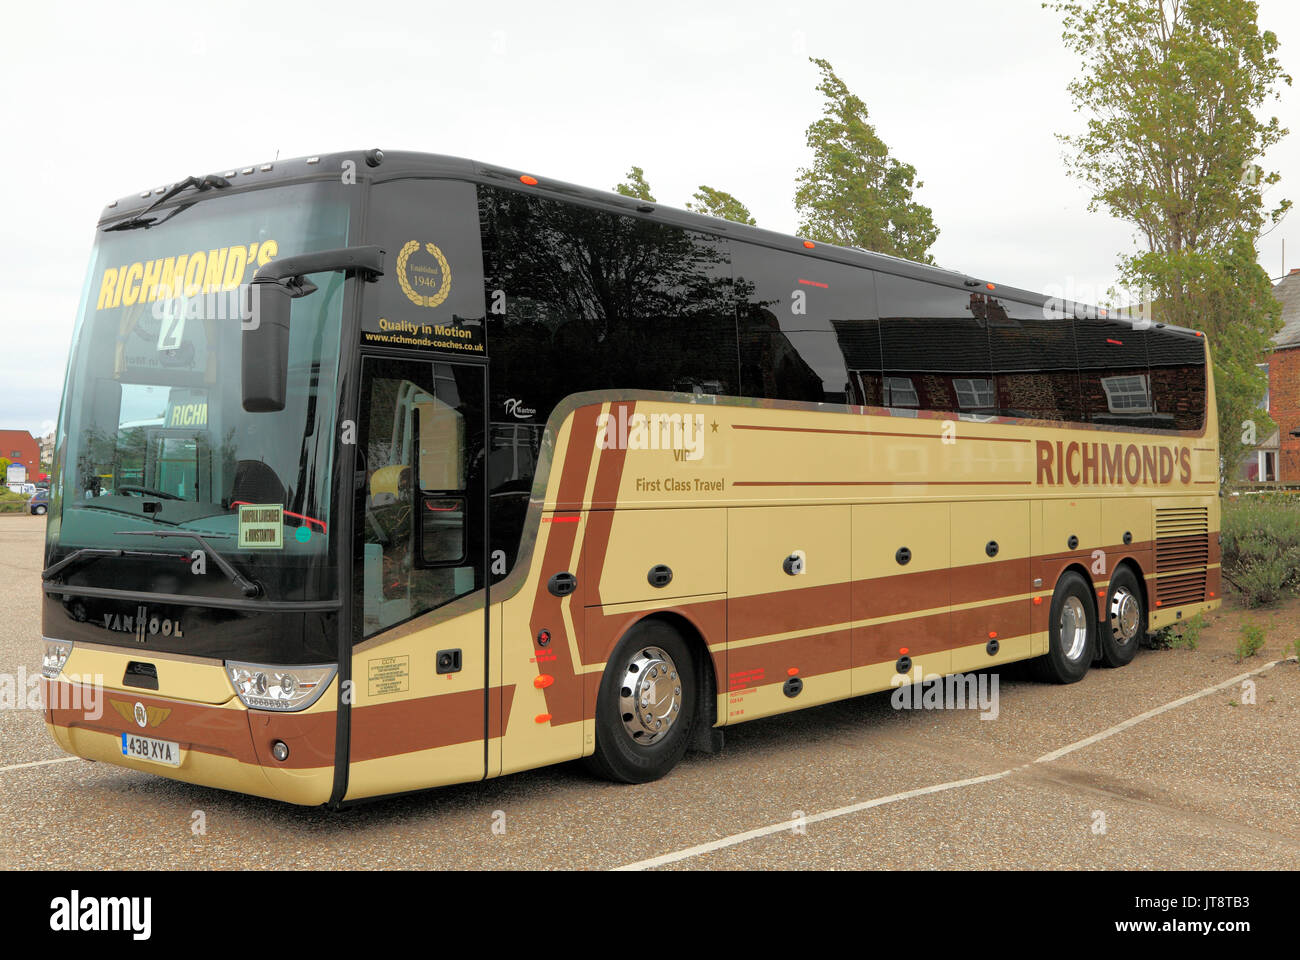 Richmonds Coaches, coach, executive travel, first cla operator, operators, company, companies, travel, day trip, trips, holidays, excursions Stock Photo